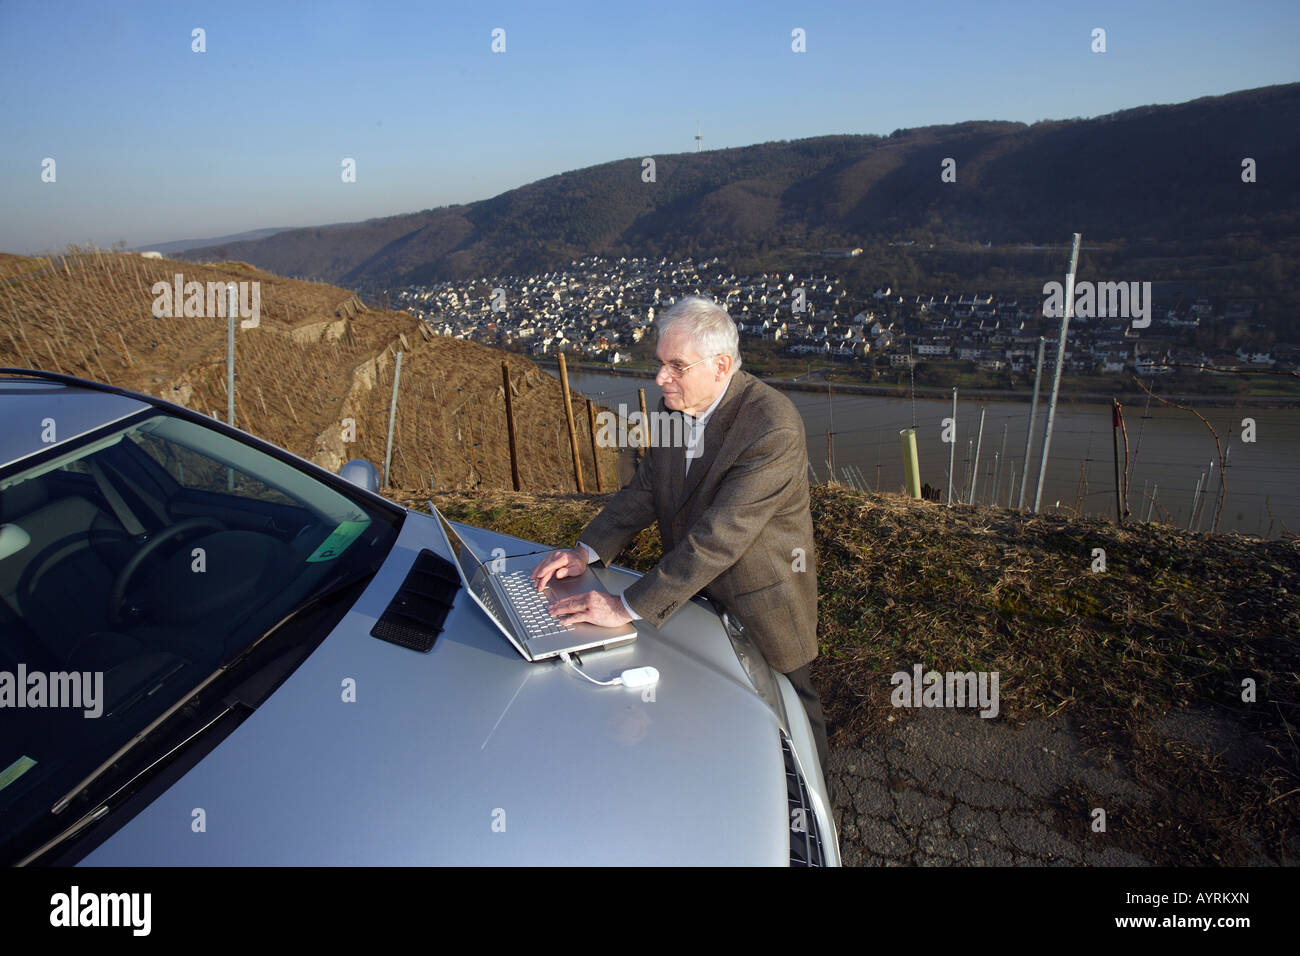 Business working on laptop on the hood of his car at a vineyard near Winningen, Rhineland-Palatinate, Germany, Europe Stock Photo